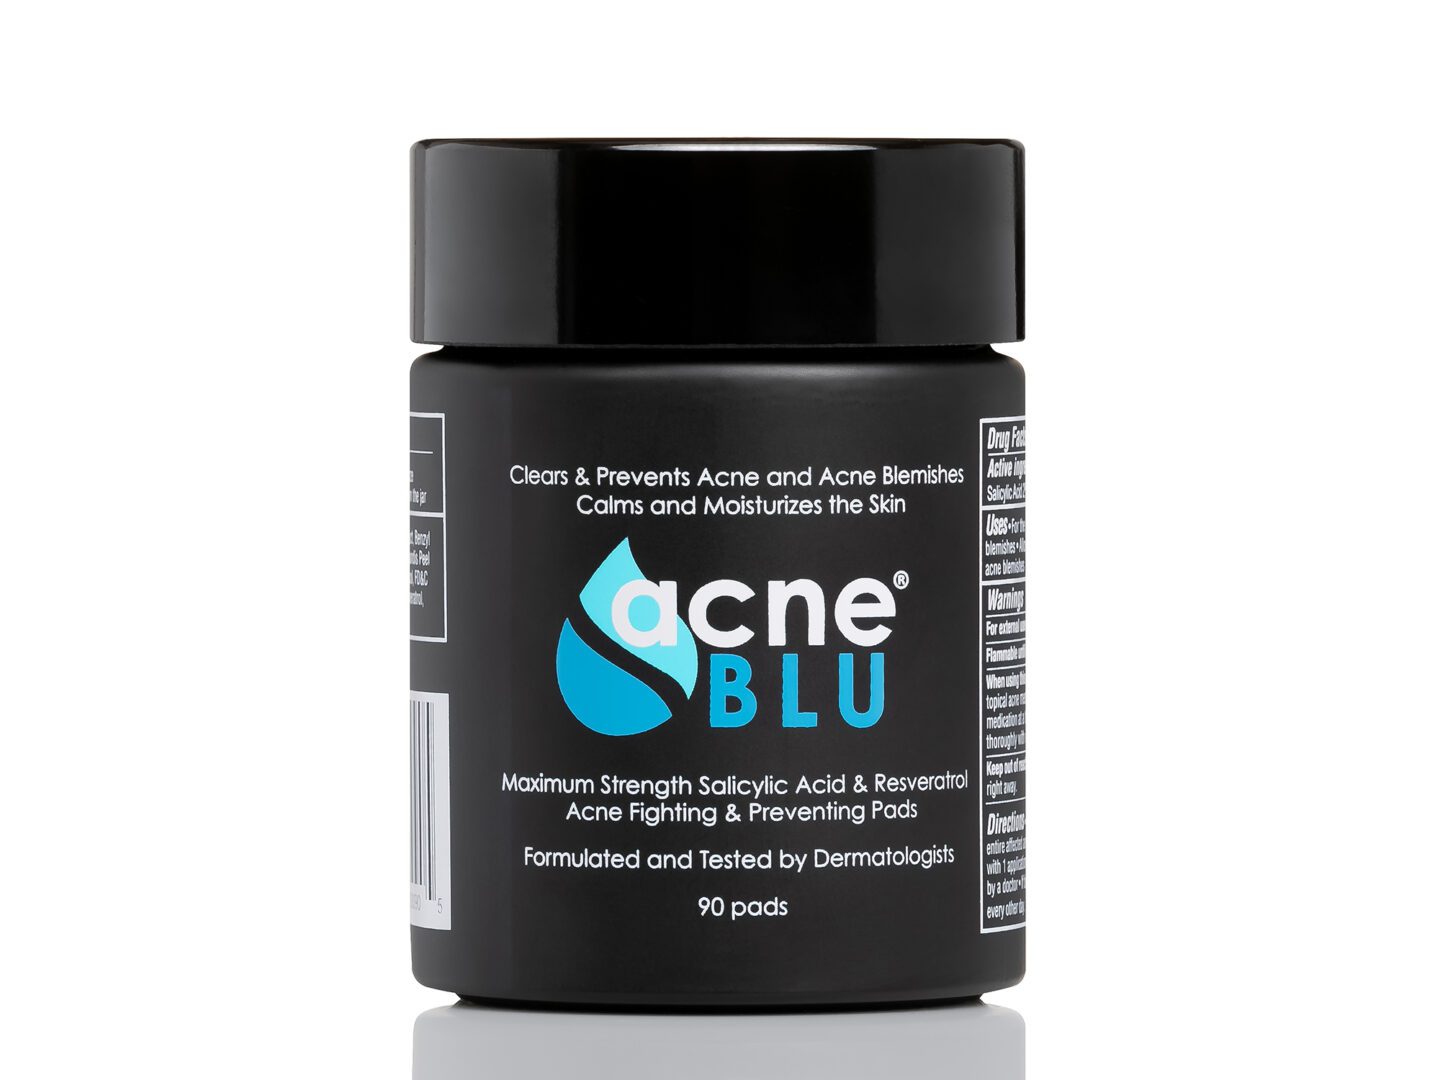 Acne BLU black glass jar front with 90 acne and blemish medicated pads or wipes